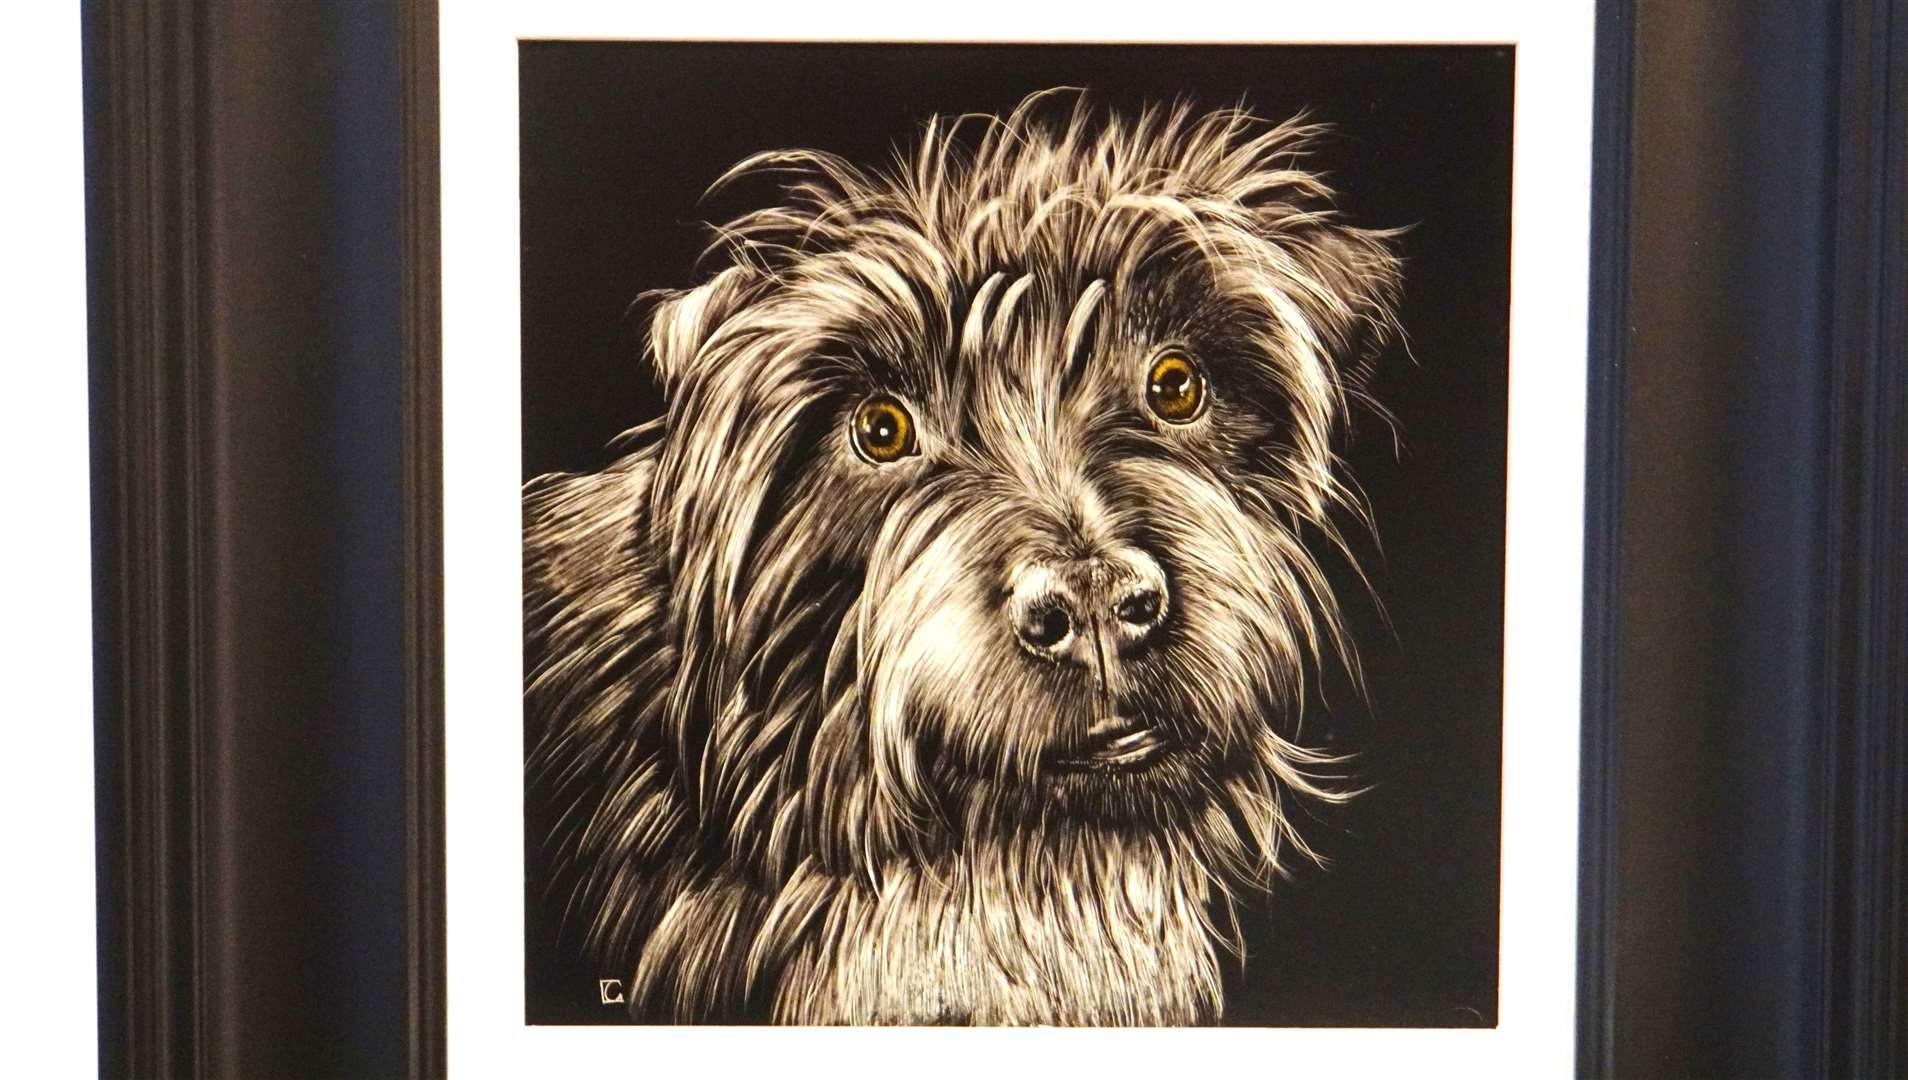 Lindsey also does pet portraits to commission. This is her own dog called Paddy.